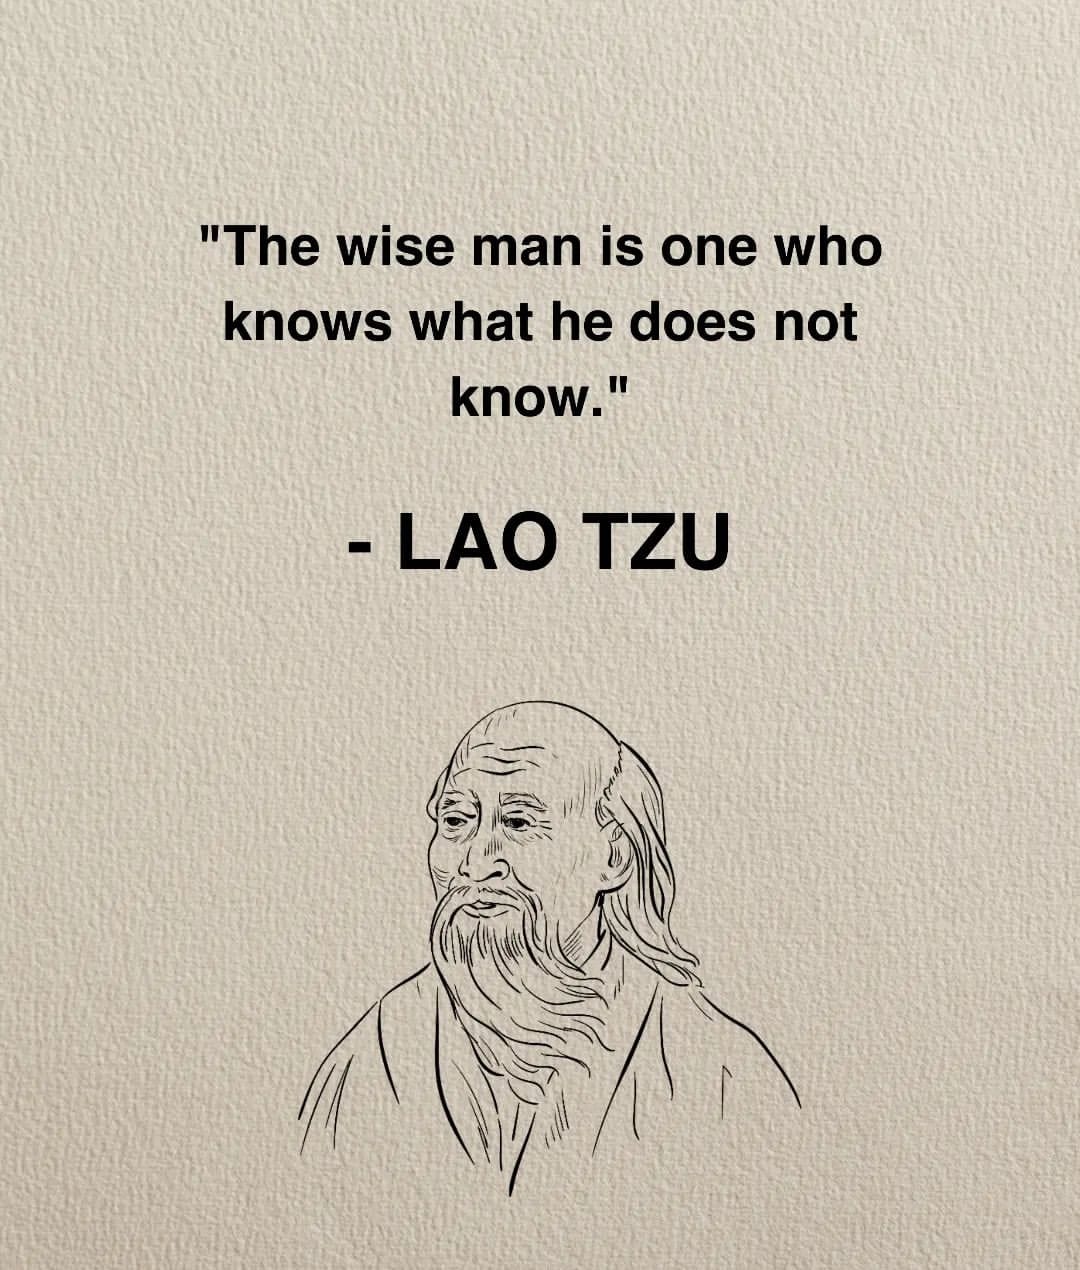 The wise man is one who, knows, what he does not know